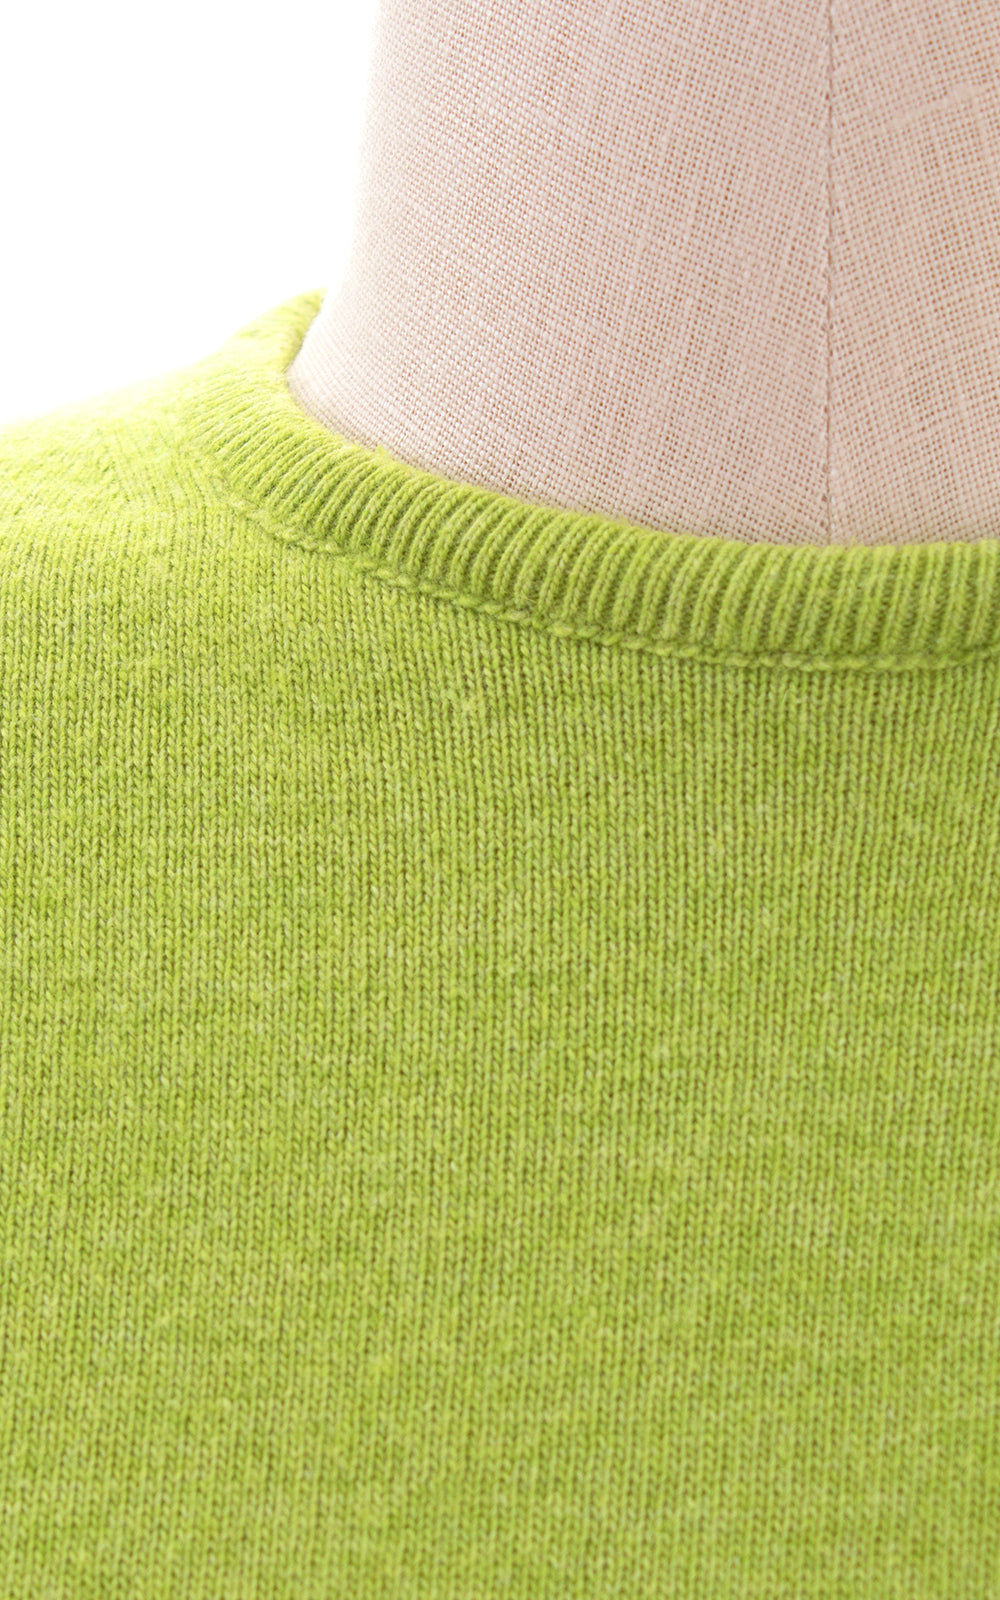 1950s Lime Green Cashmere Knit Sweater Top